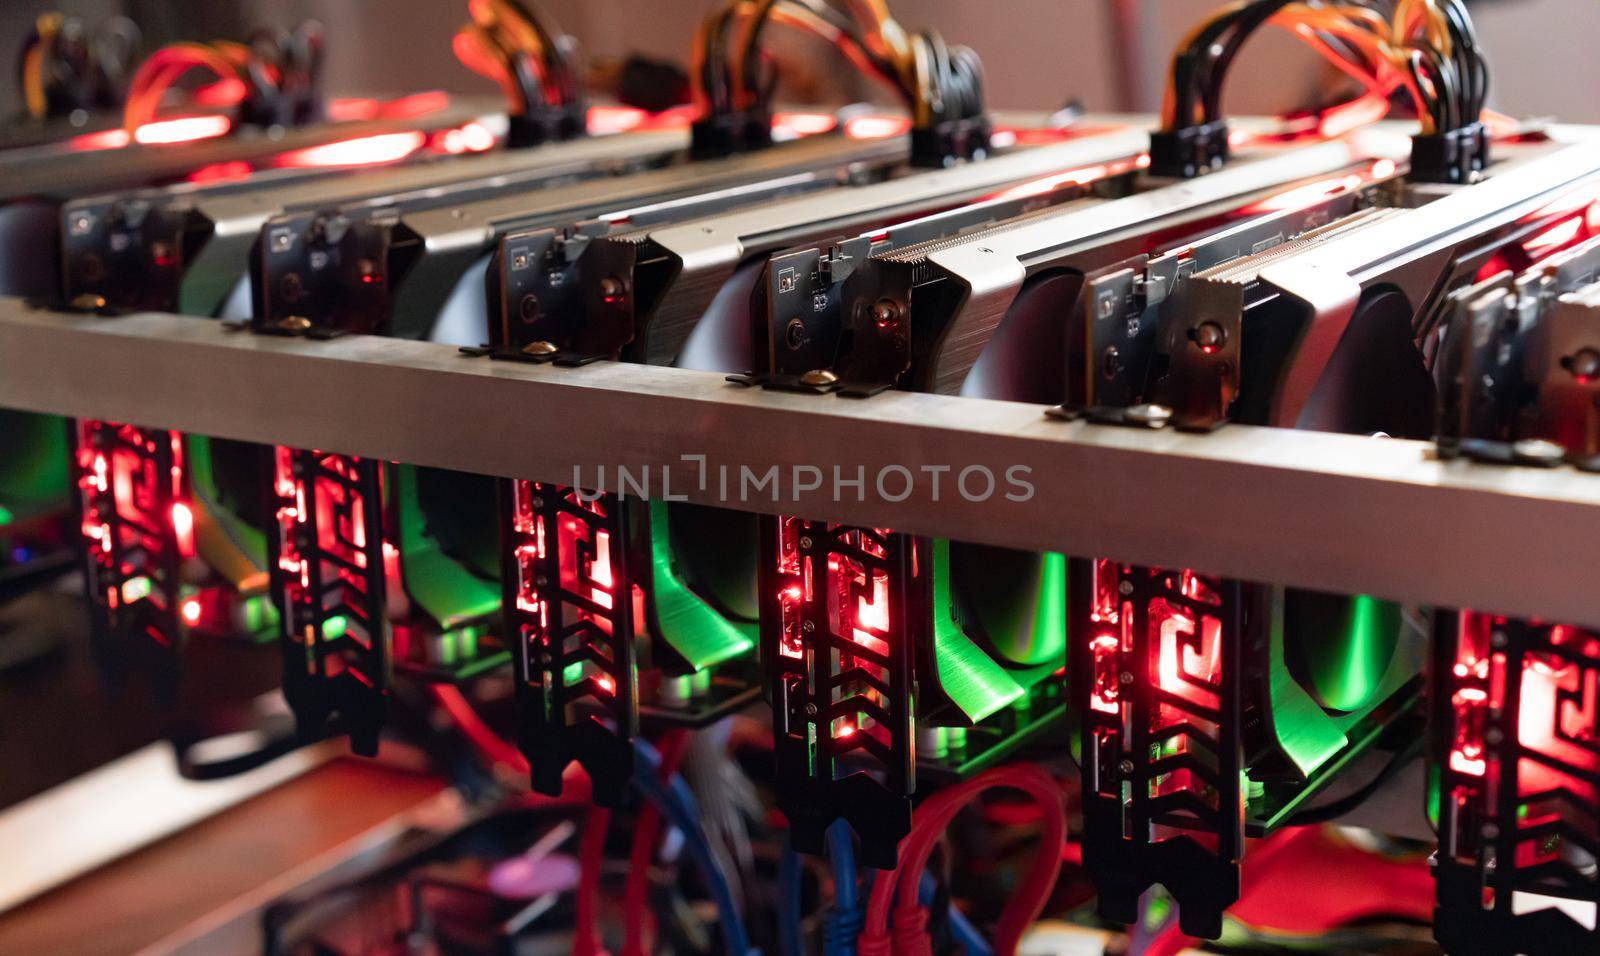 Bitcoin mining farm.  Rig for cryptocurrency miner by Buttus_casso